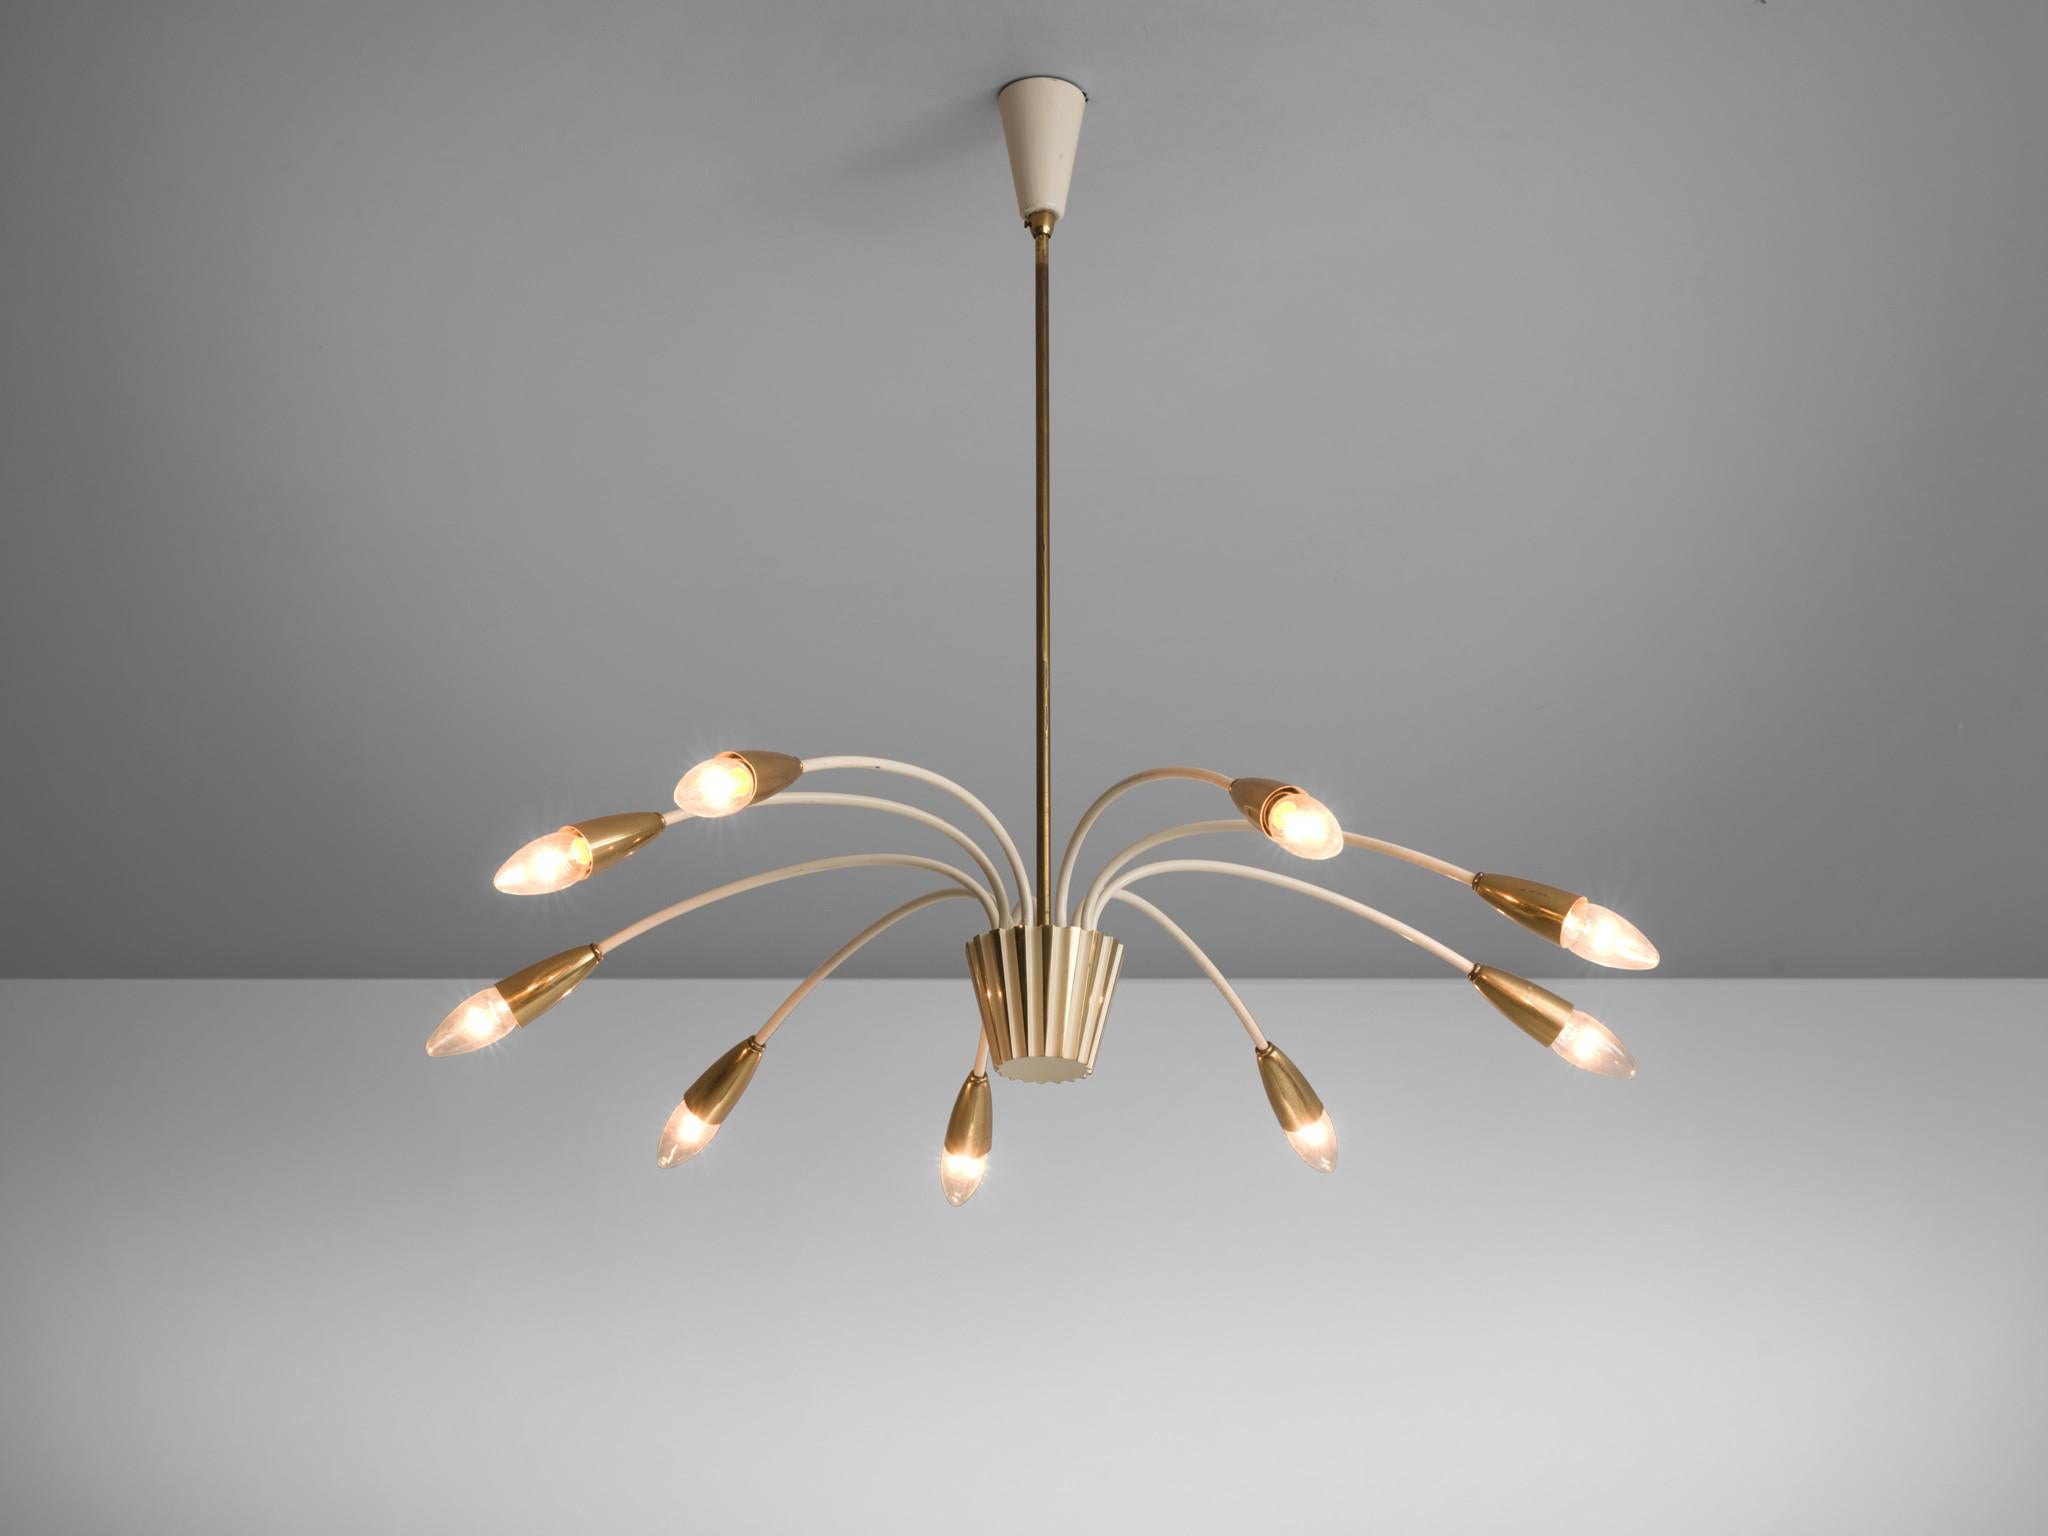 Pendant, brass, white-coated metal, glass, Italy, circa 1960s. 

This brass, large nine armed biomorphic pendant is both modern and classic at the same time, a trait that Italian lights often achieve. The chandelier is delicate thanks to the sleek